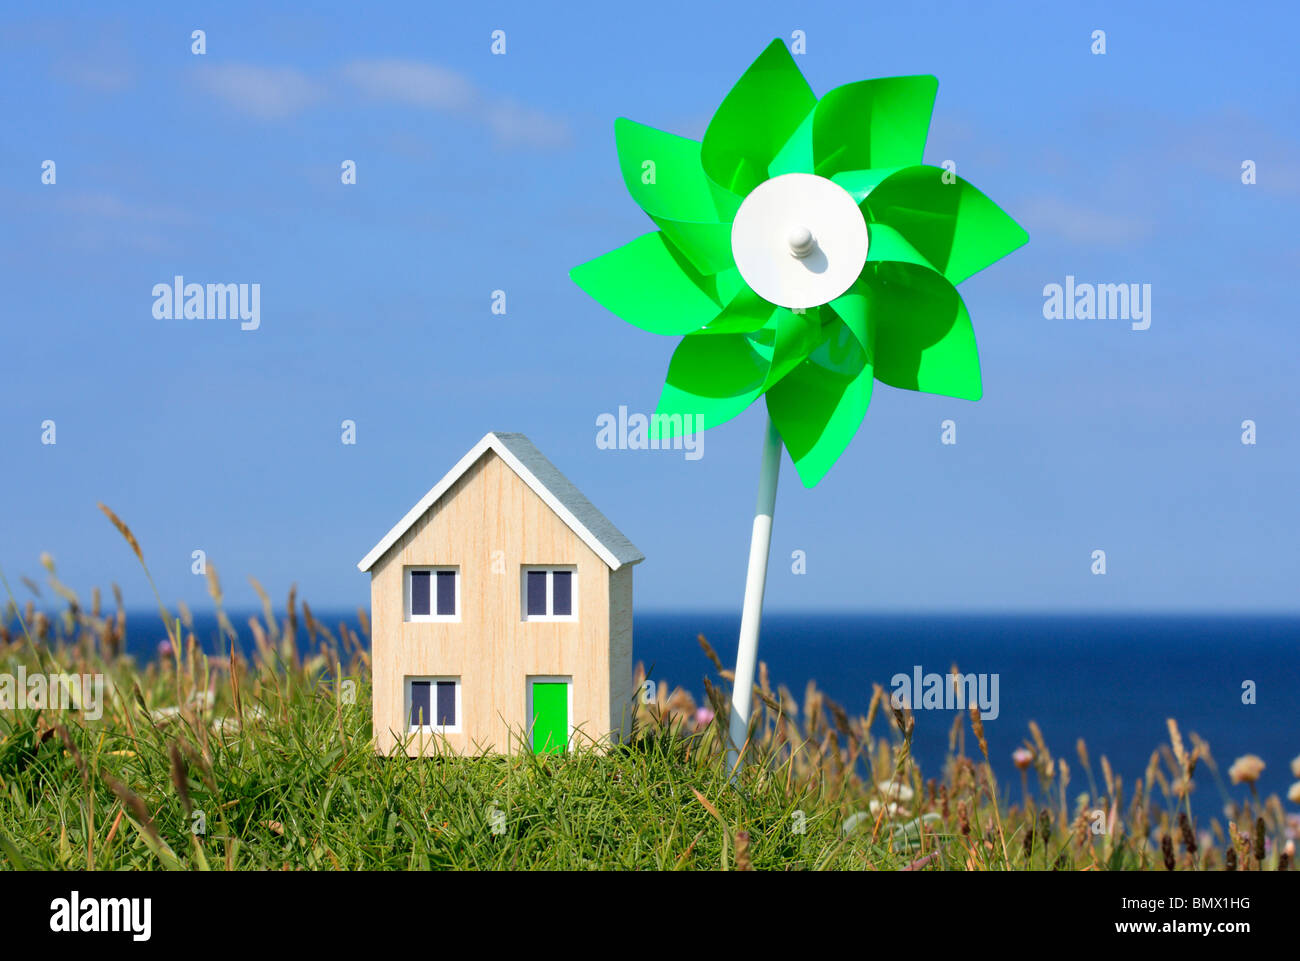 Model house and toy windmill. Stock Photo